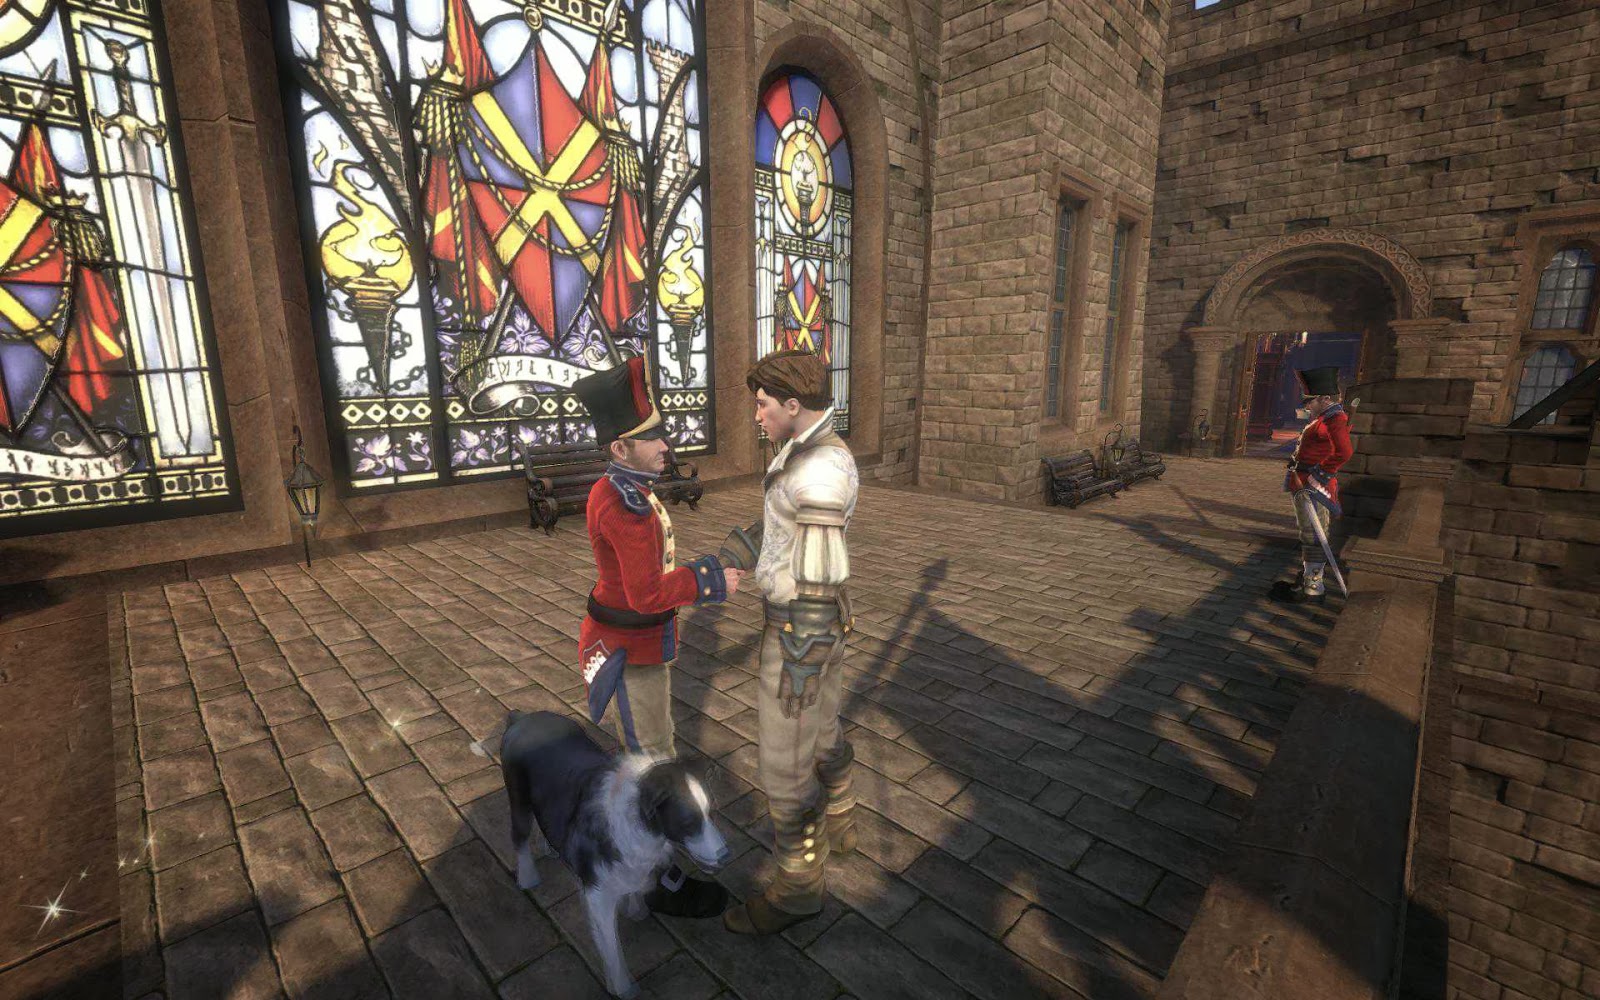 fable 2 pc version cracked